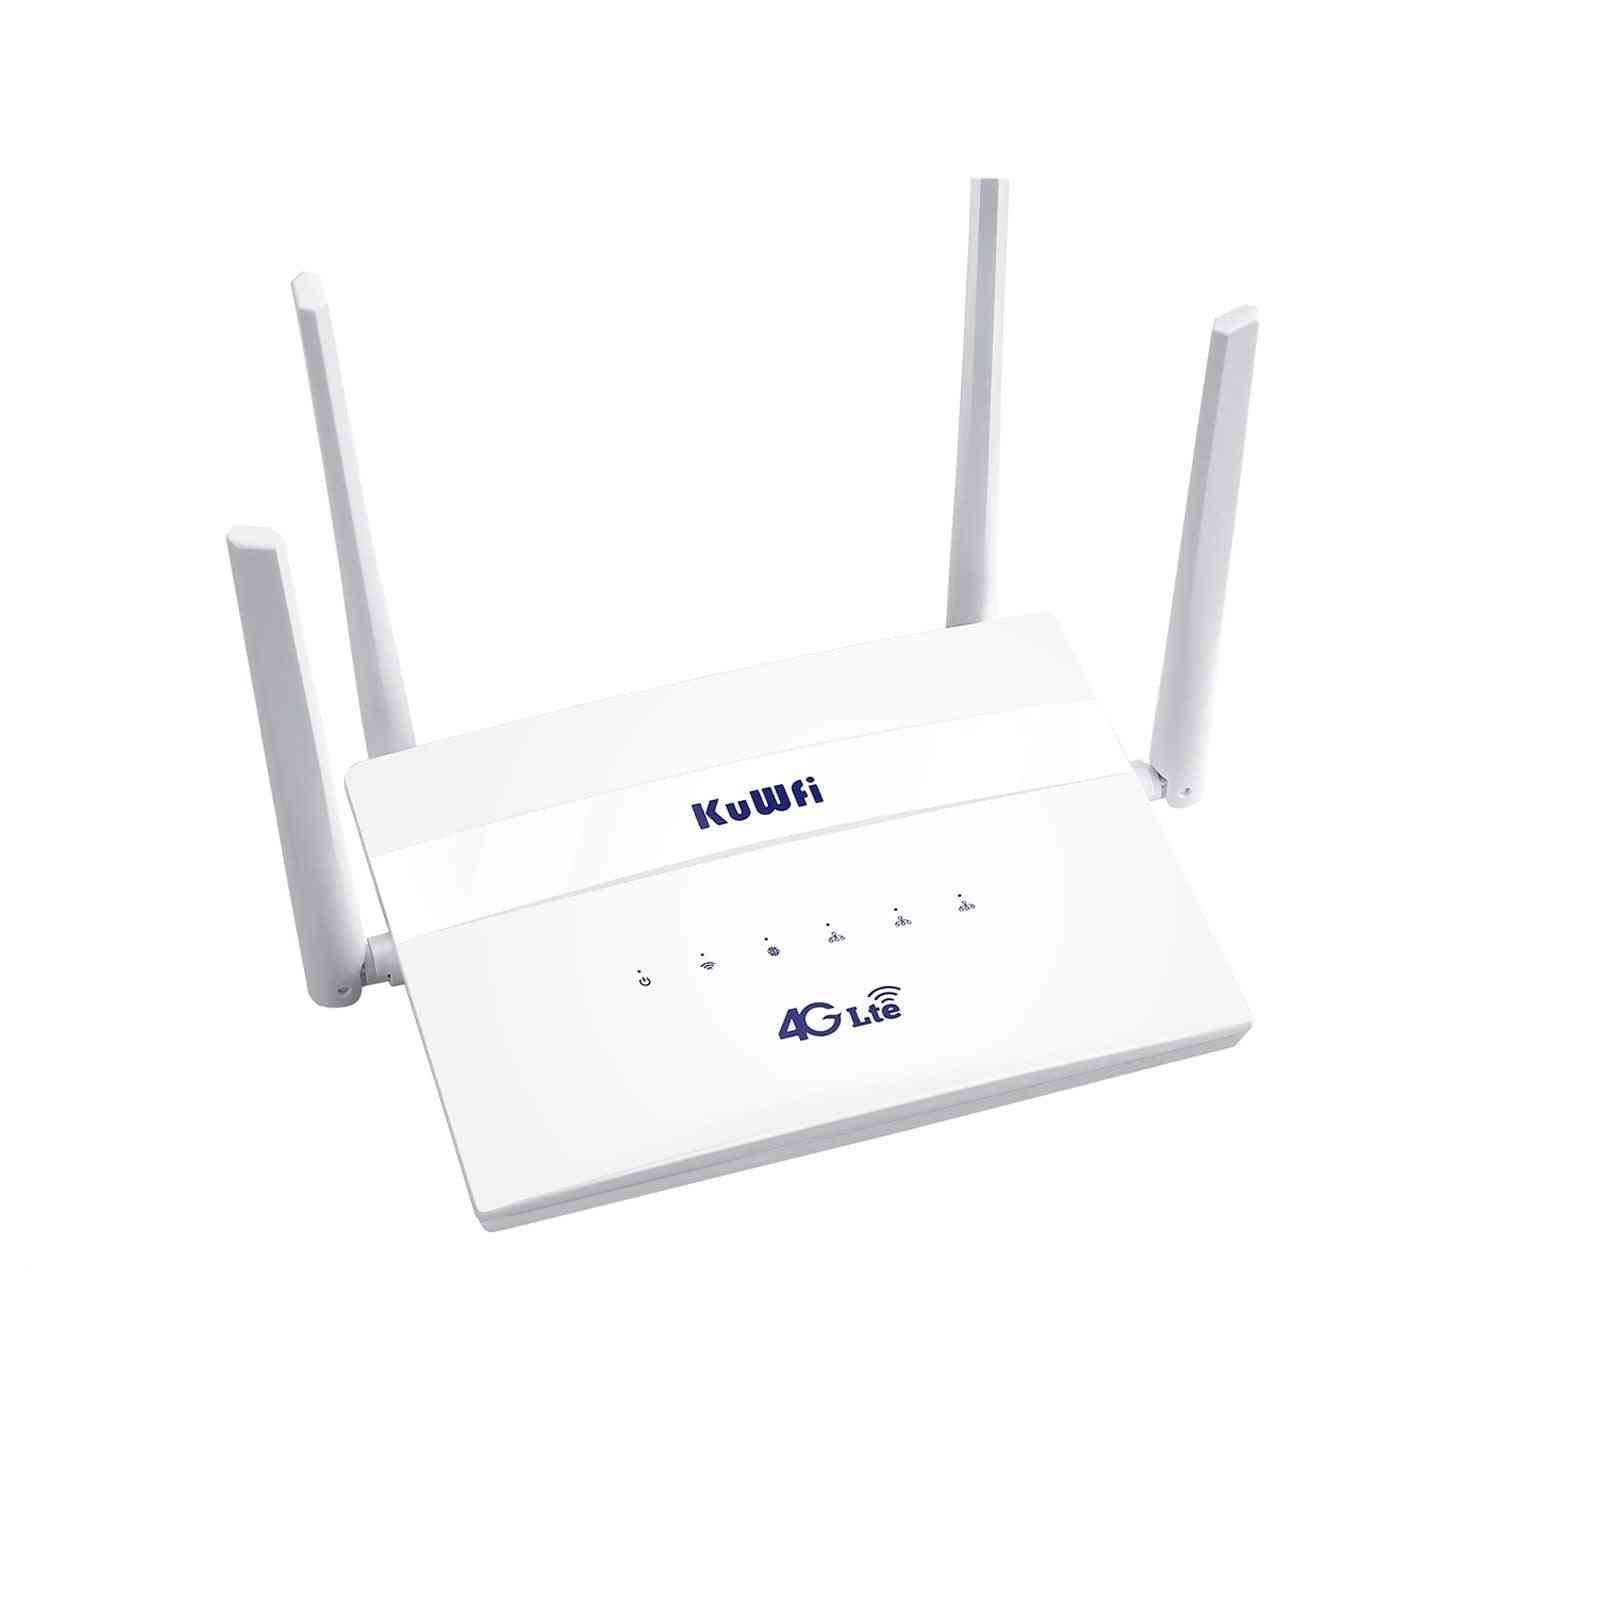 4g Lte- Wireless Wide Coverage With 4 High-gain, External Antennas, Wifi Router